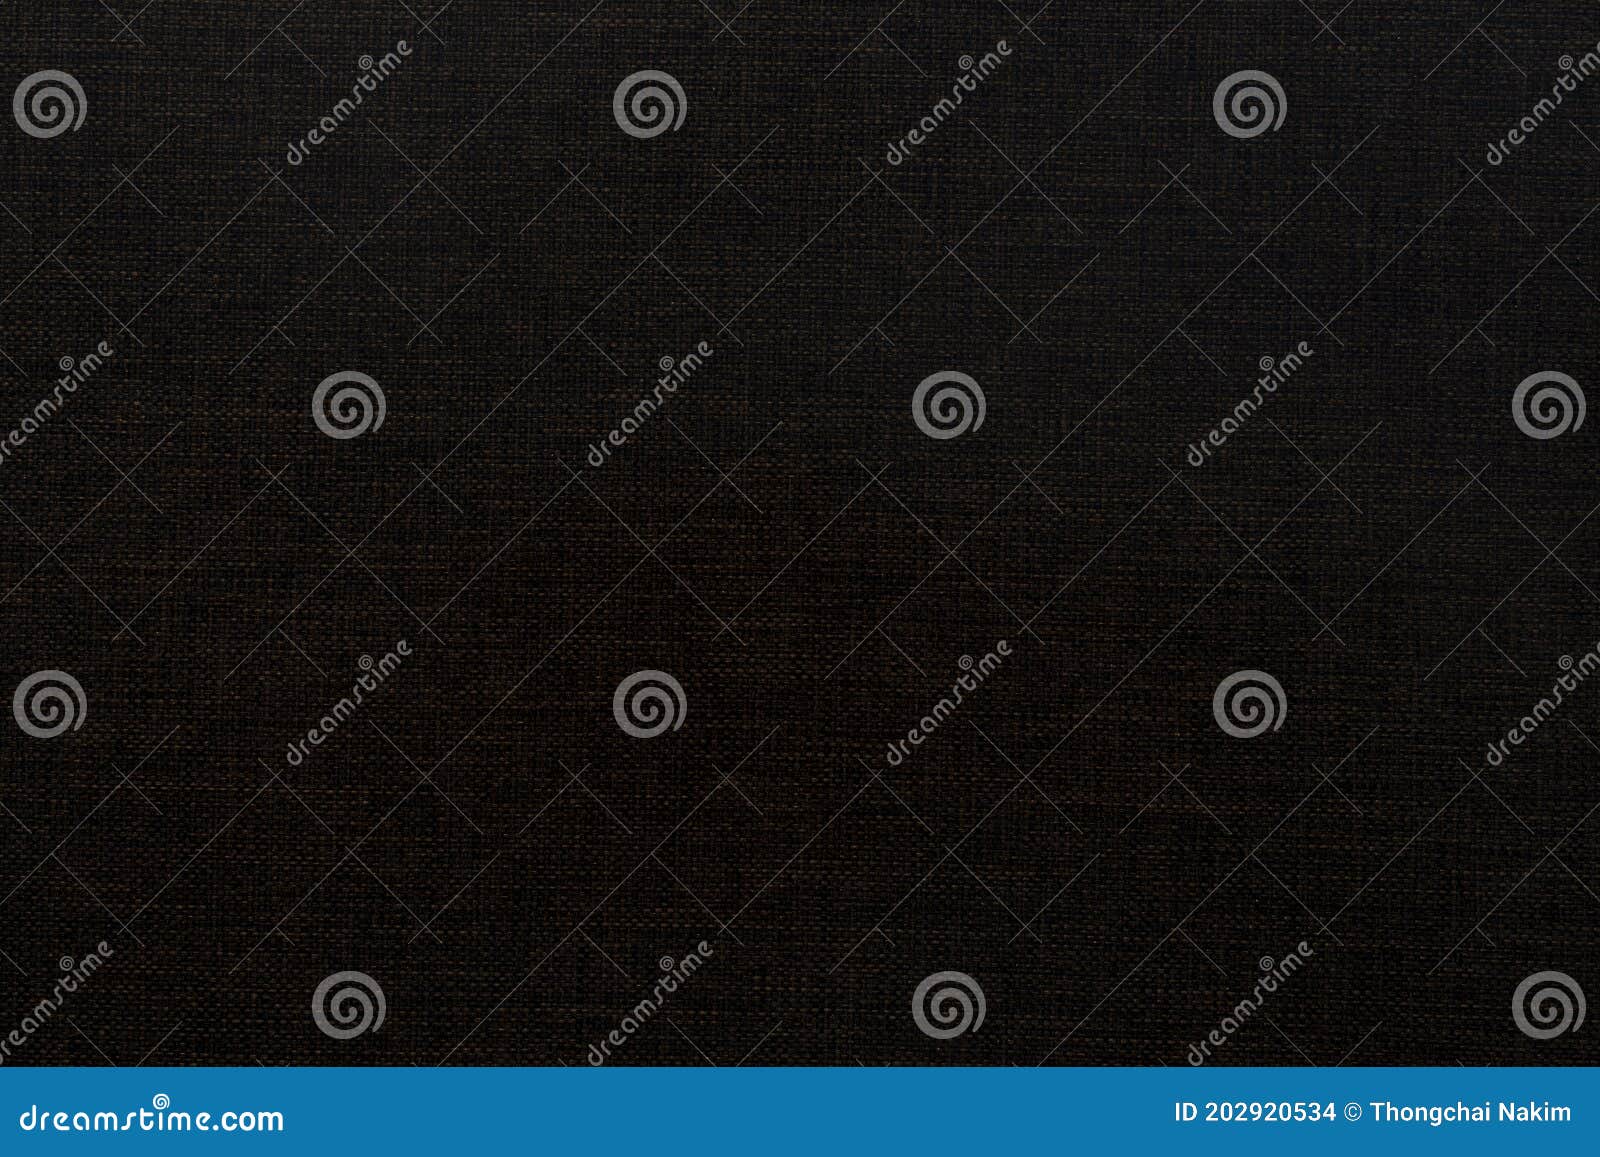 Dark Brown Fine Patterned Fabric Background. Stock Photo - Image of ...